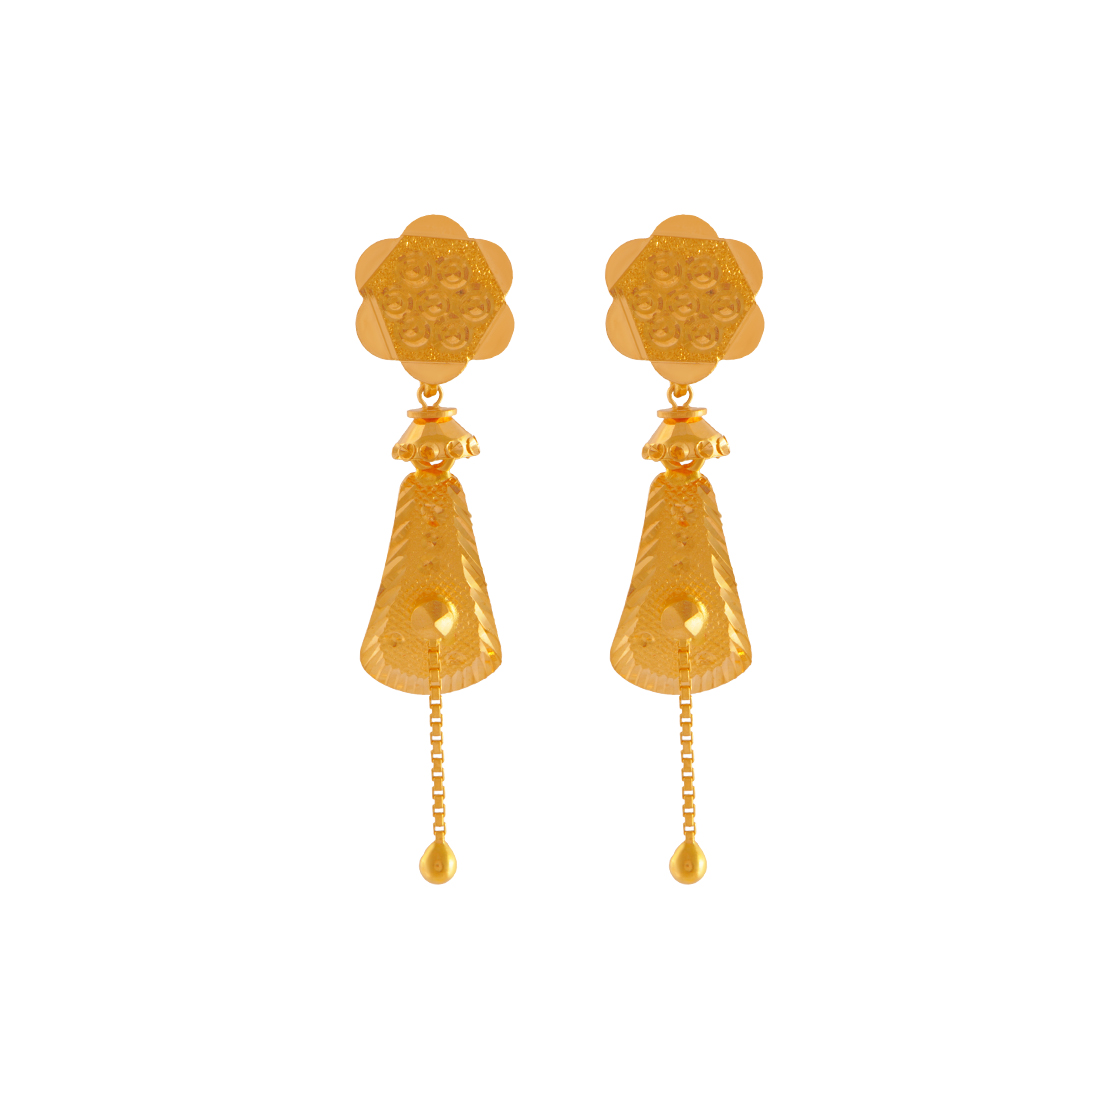 South Indian 22K Gold Plated Full Ear Variations Different Jhumka Earrings  Set  eBay  Gold necklace indian bridal jewelry Gold jewellery design  necklaces Gold earrings designs